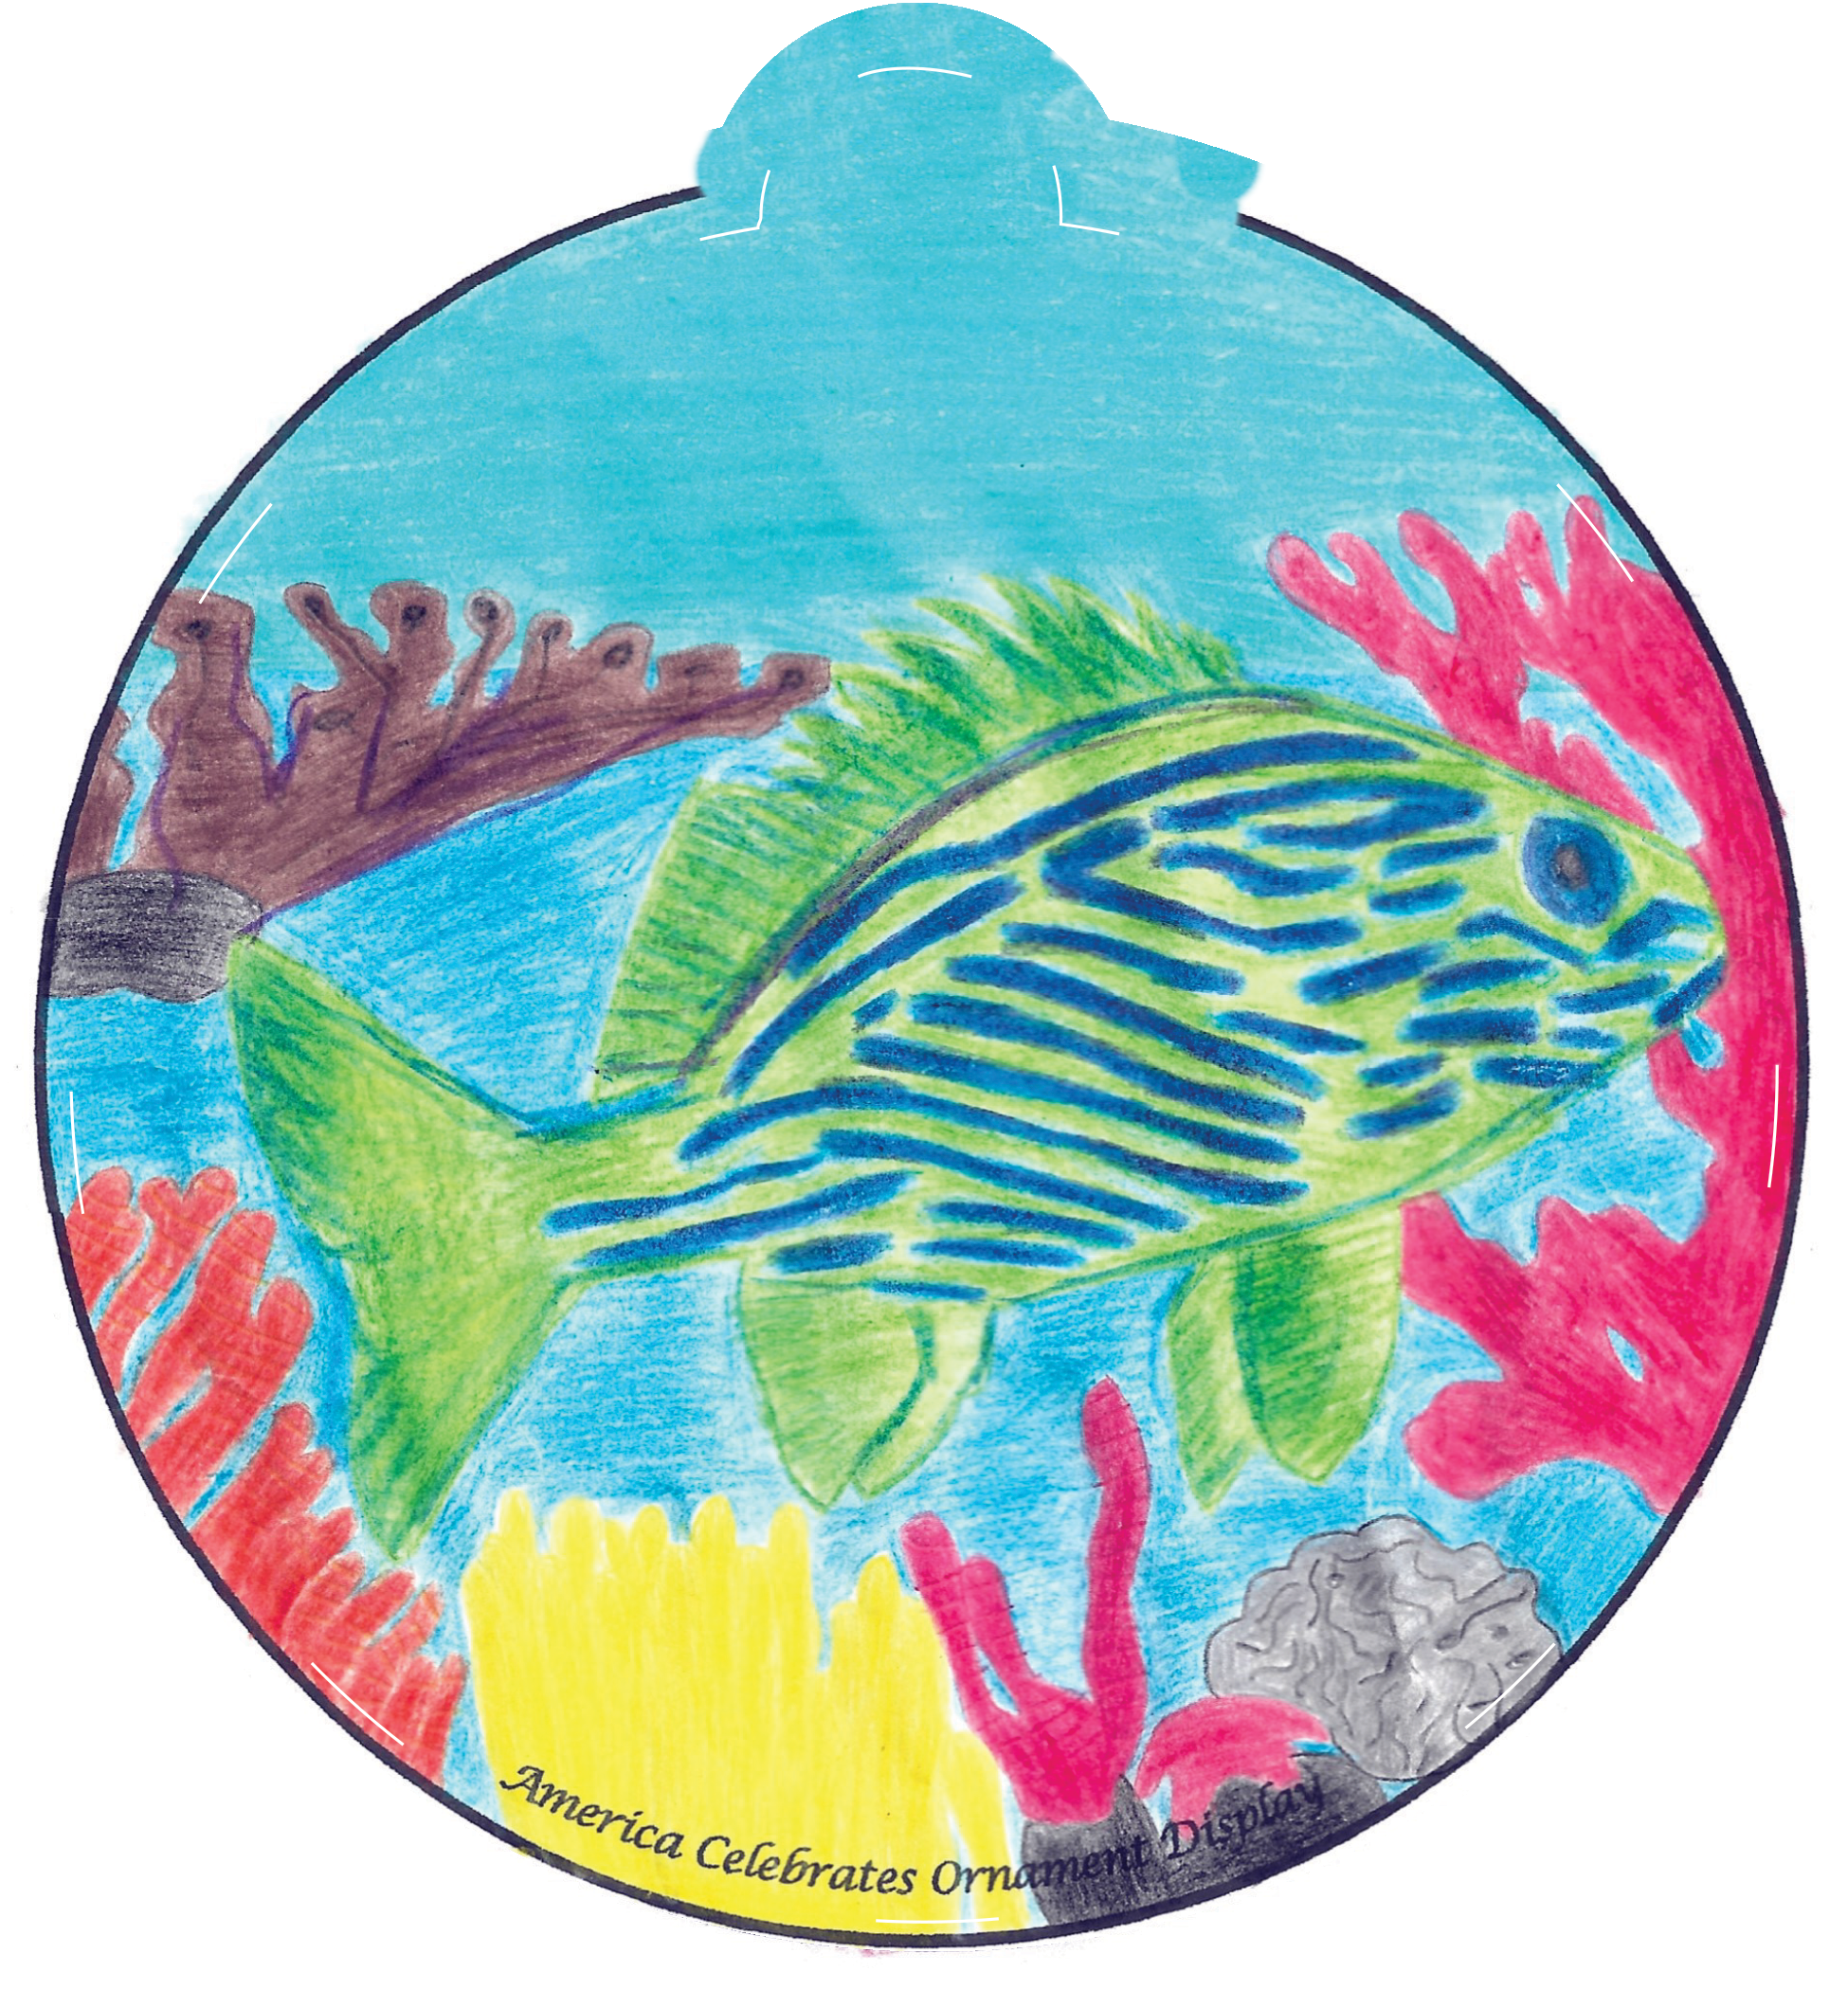 Ornament depicting a tropical fish underwater